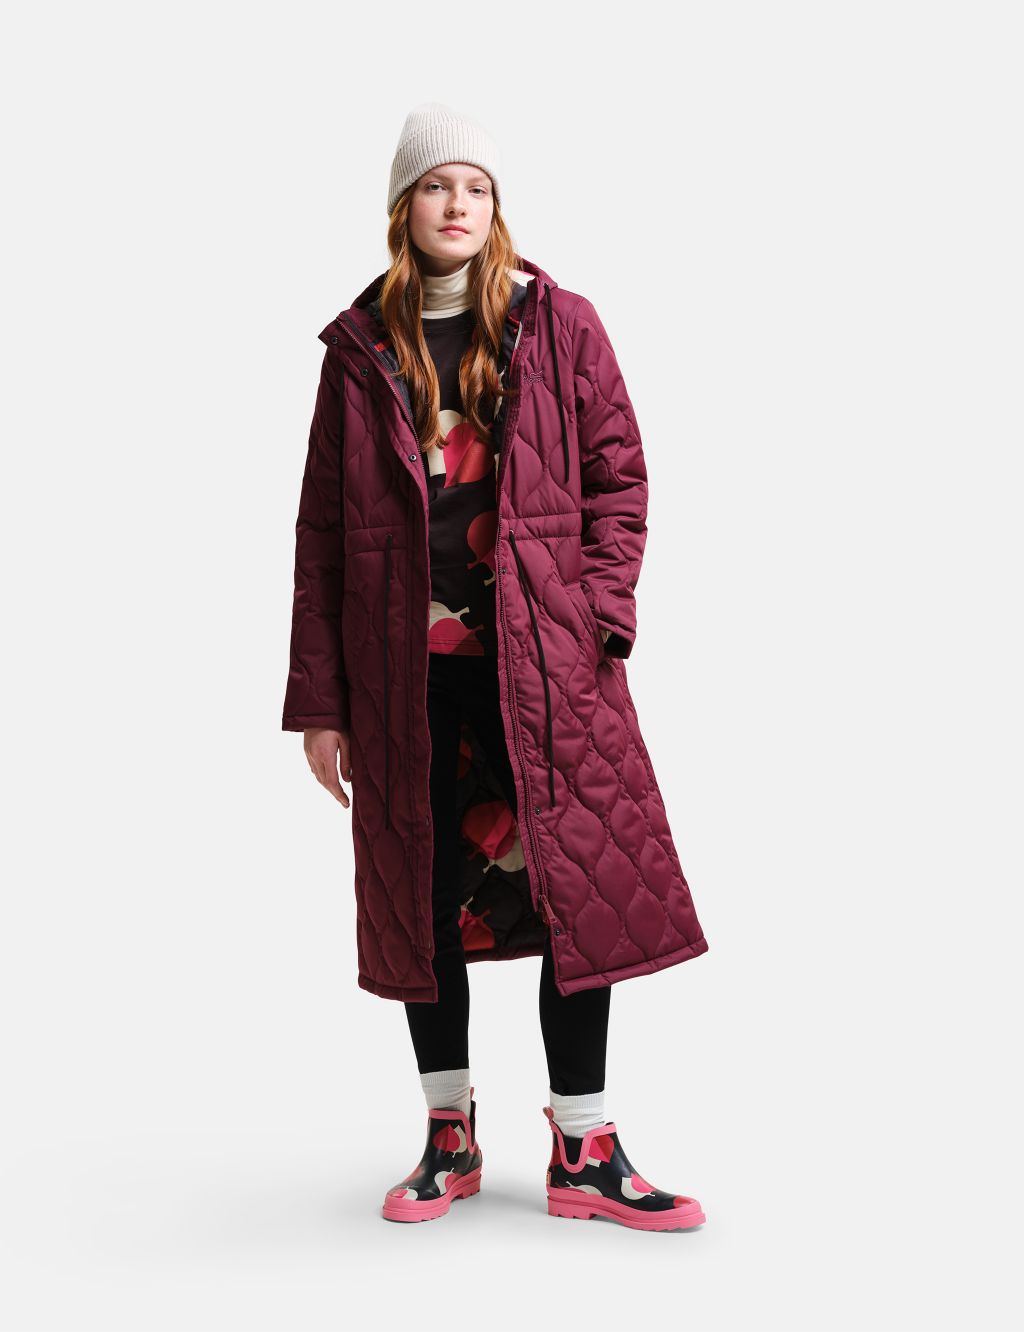 Orla Kiely Quilted Longline Coat image 1